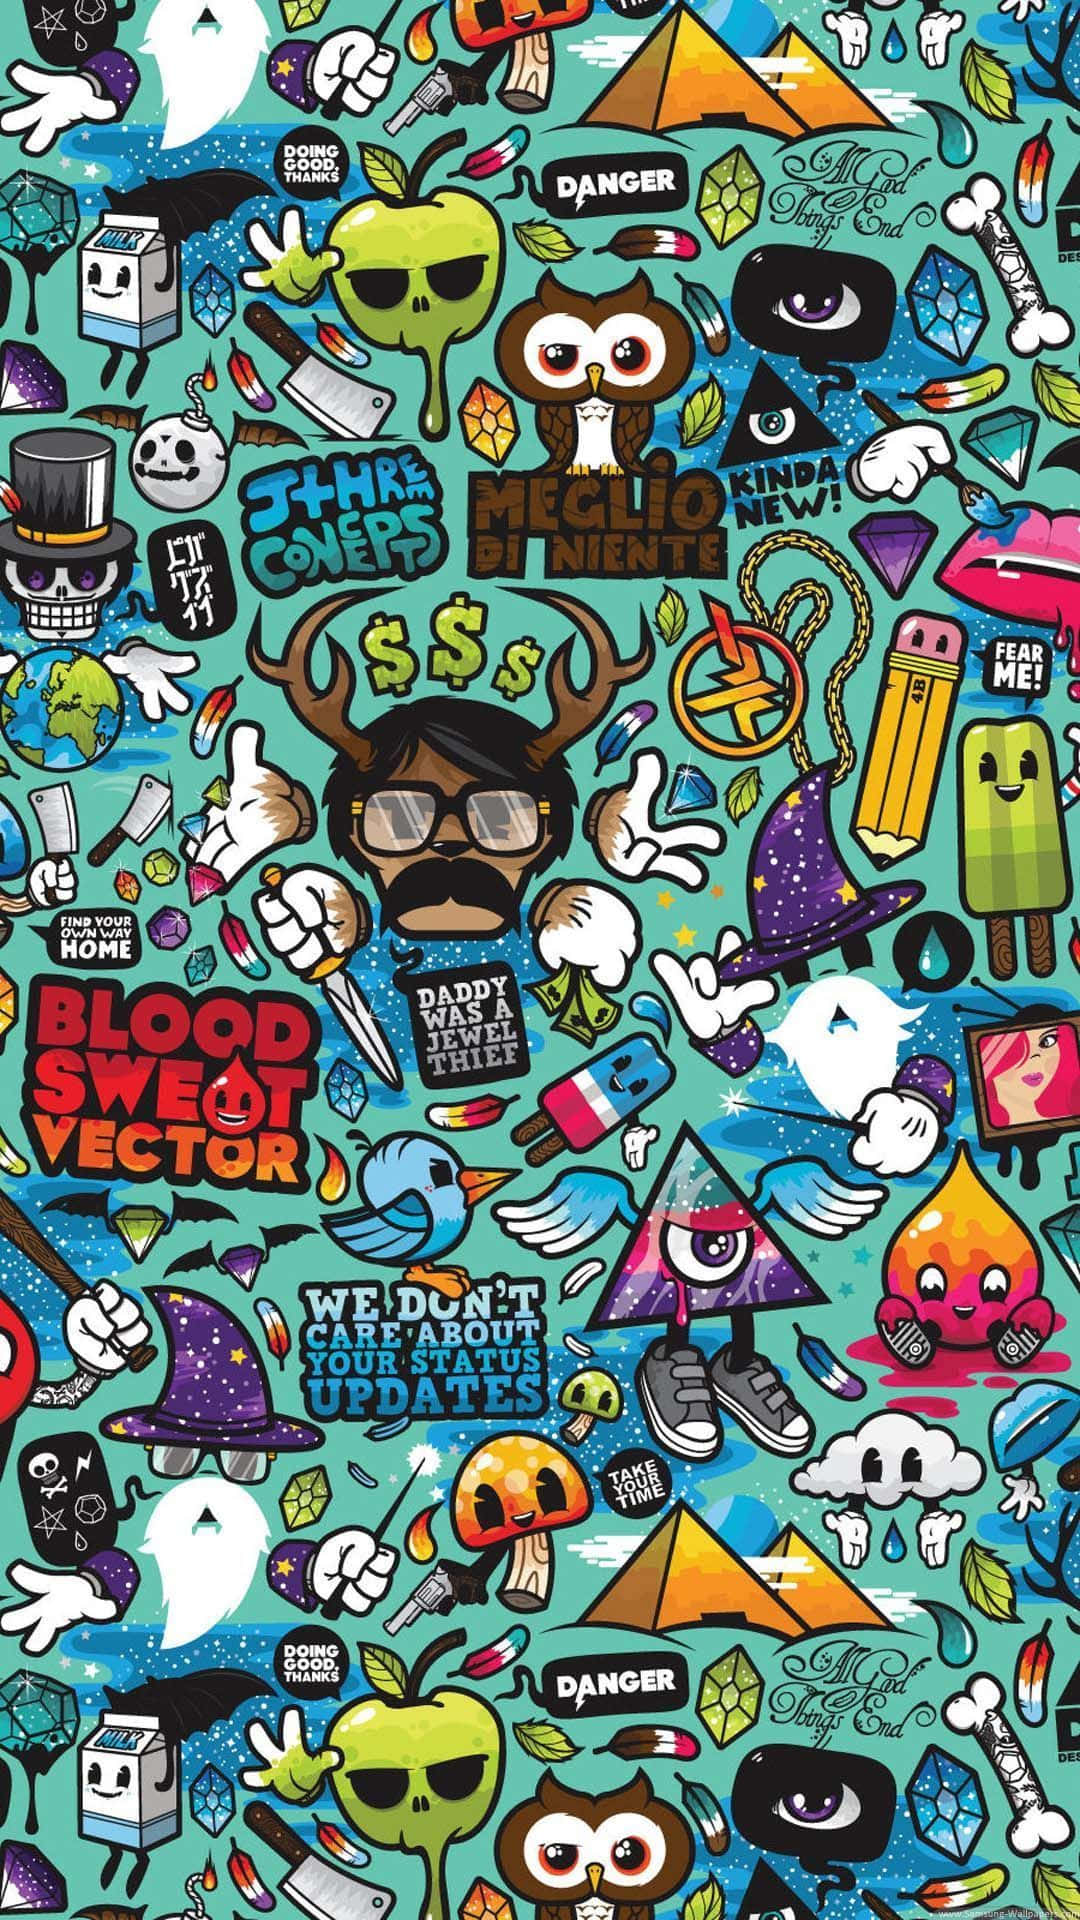 Look Cool, Feel Swagger with the Latest Swag iPhone Wallpaper